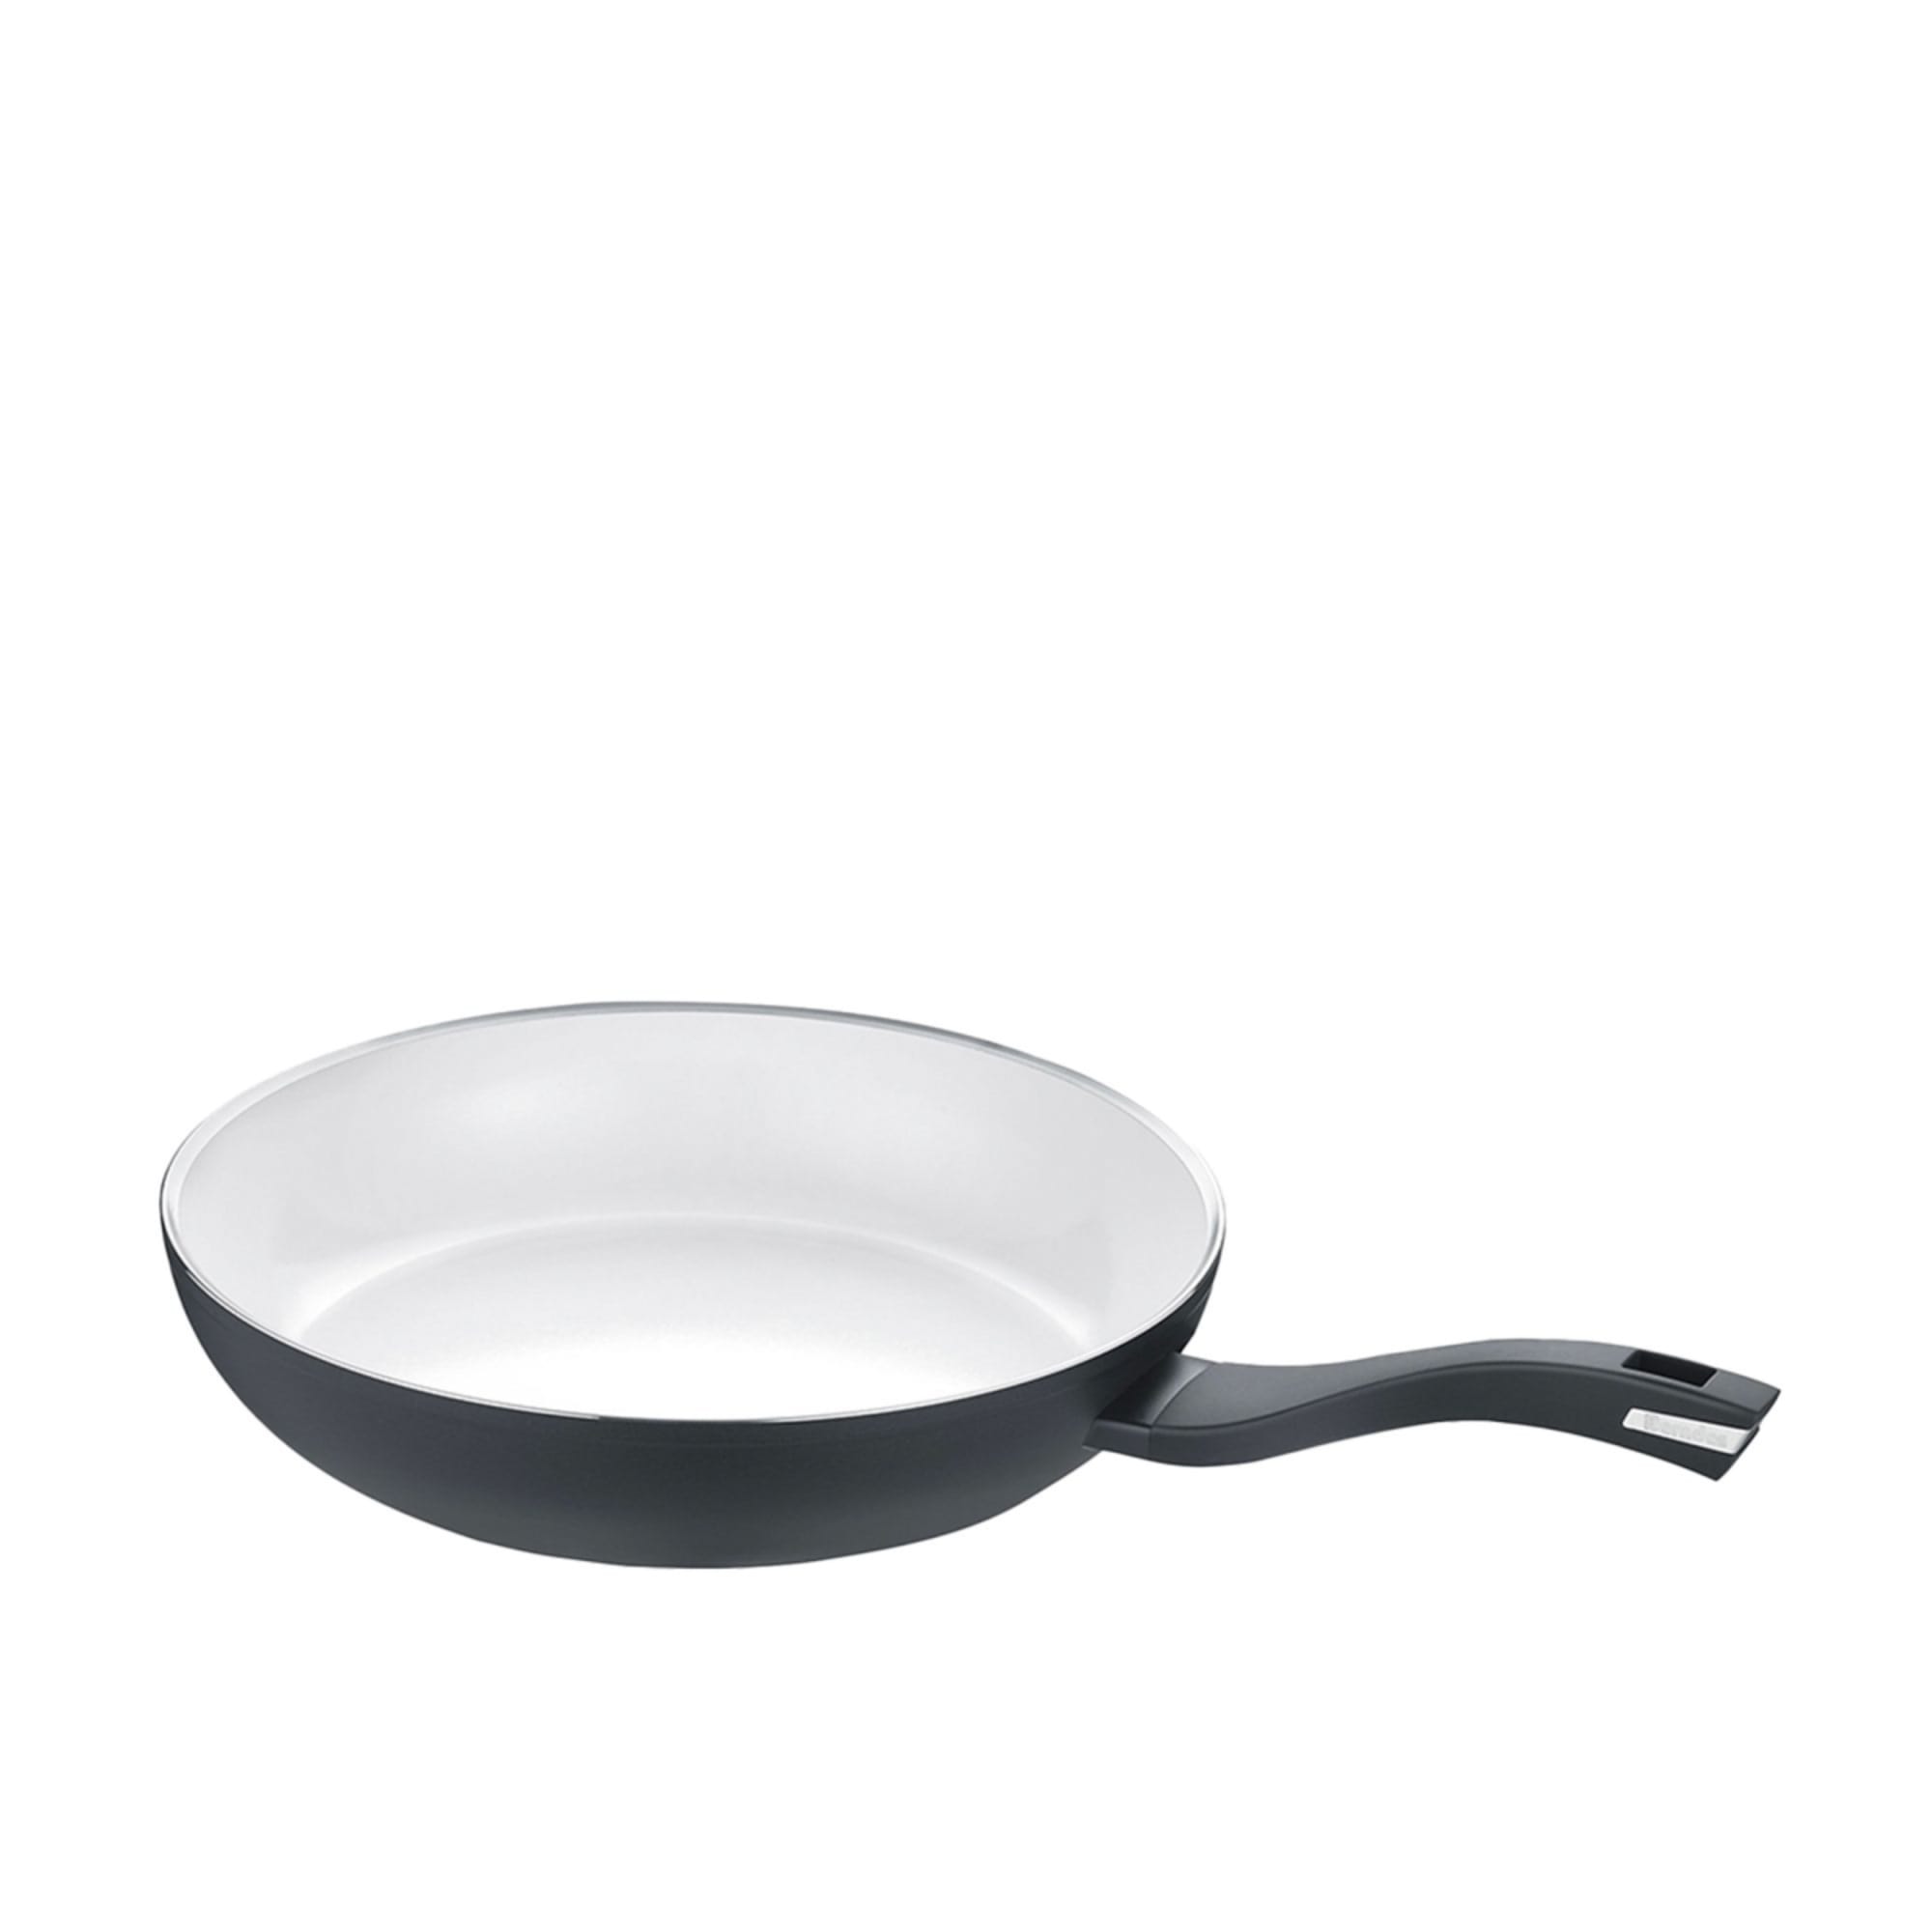 https://res.cloudinary.com/kitchenwarehouse/image/upload/c_fill,g_face,w_1250/f_auto/t_PDP_2000x2000/Supplier%20Images%20/2000px/Berndes-B-Nature-Non-Stick-Frypan-30cm_1_2000px.jpg?imagetype=pdp_full